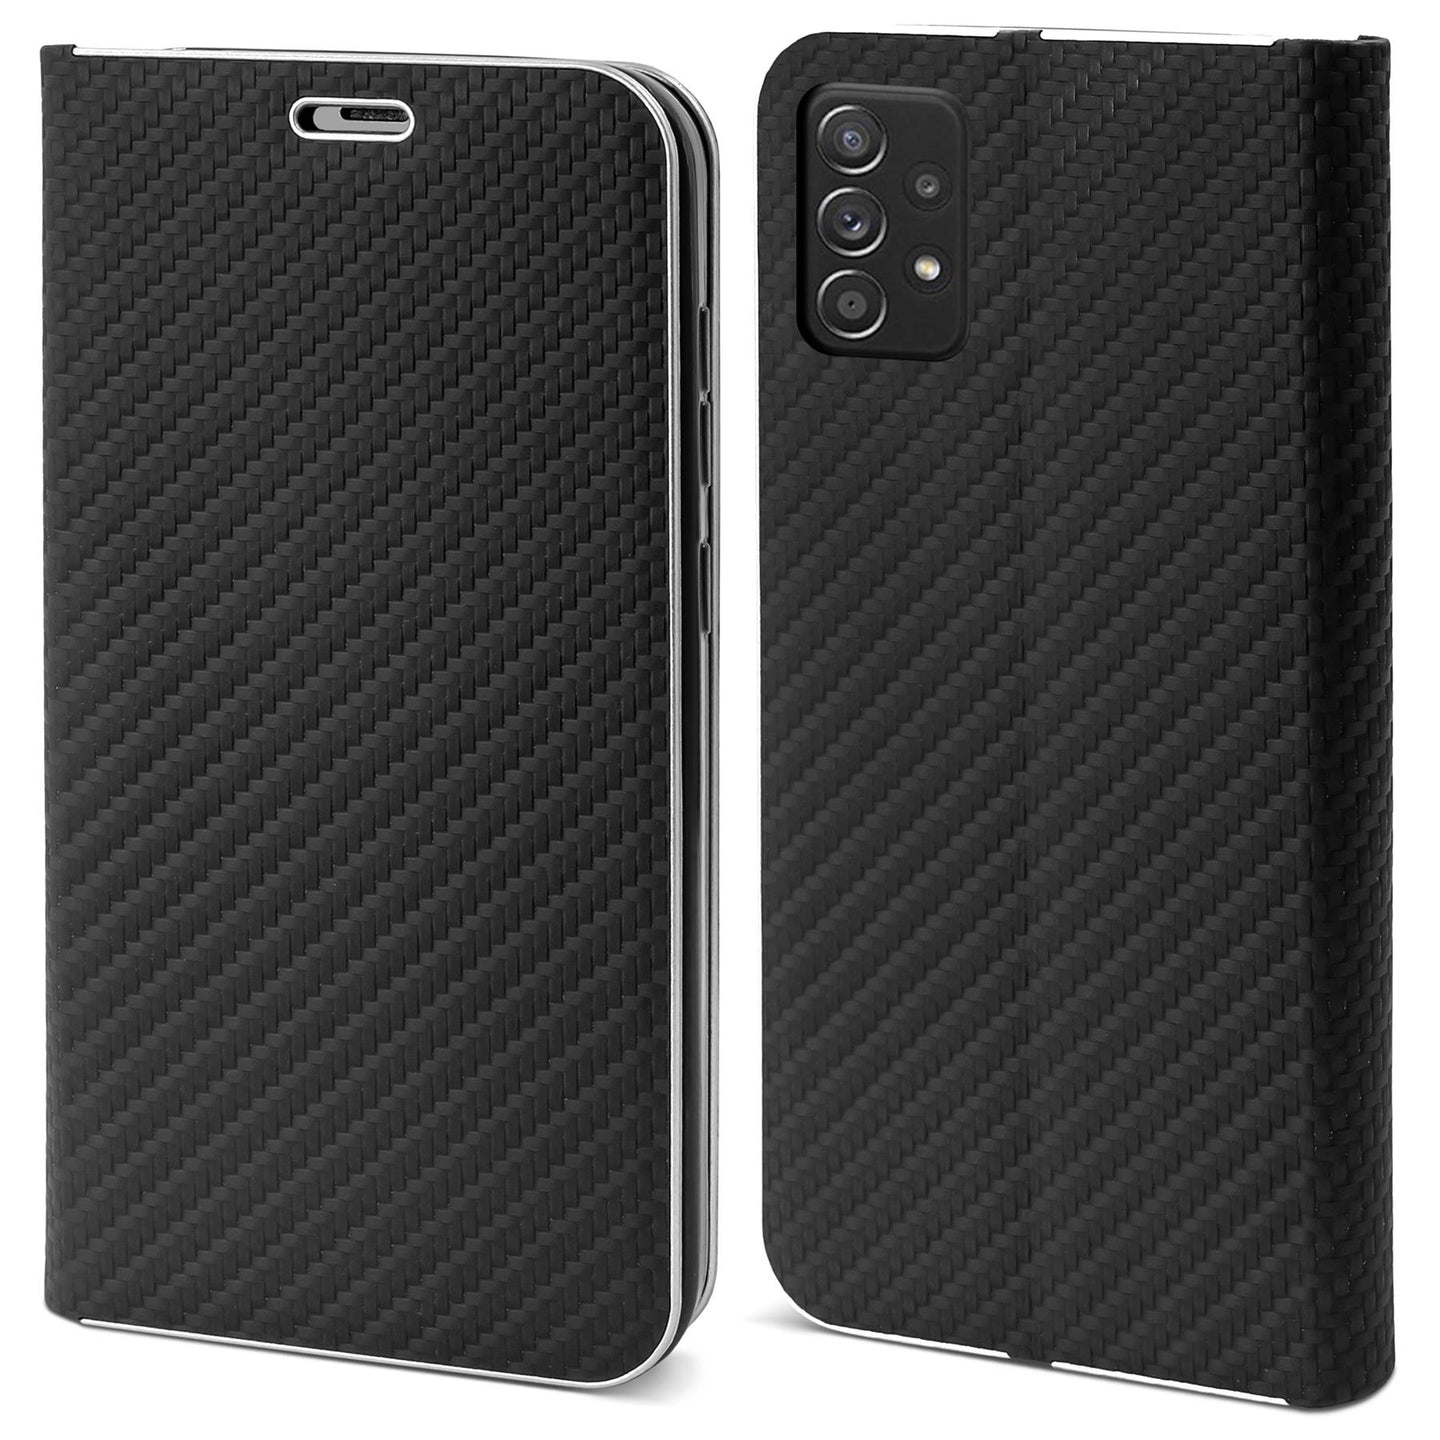 Moozy Wallet Case for Samsung A52s 5G and Samsung A52, Black Carbon – Flip Case with Metallic Border Design Magnetic Closure Flip Cover with Card Holder and Kickstand Function